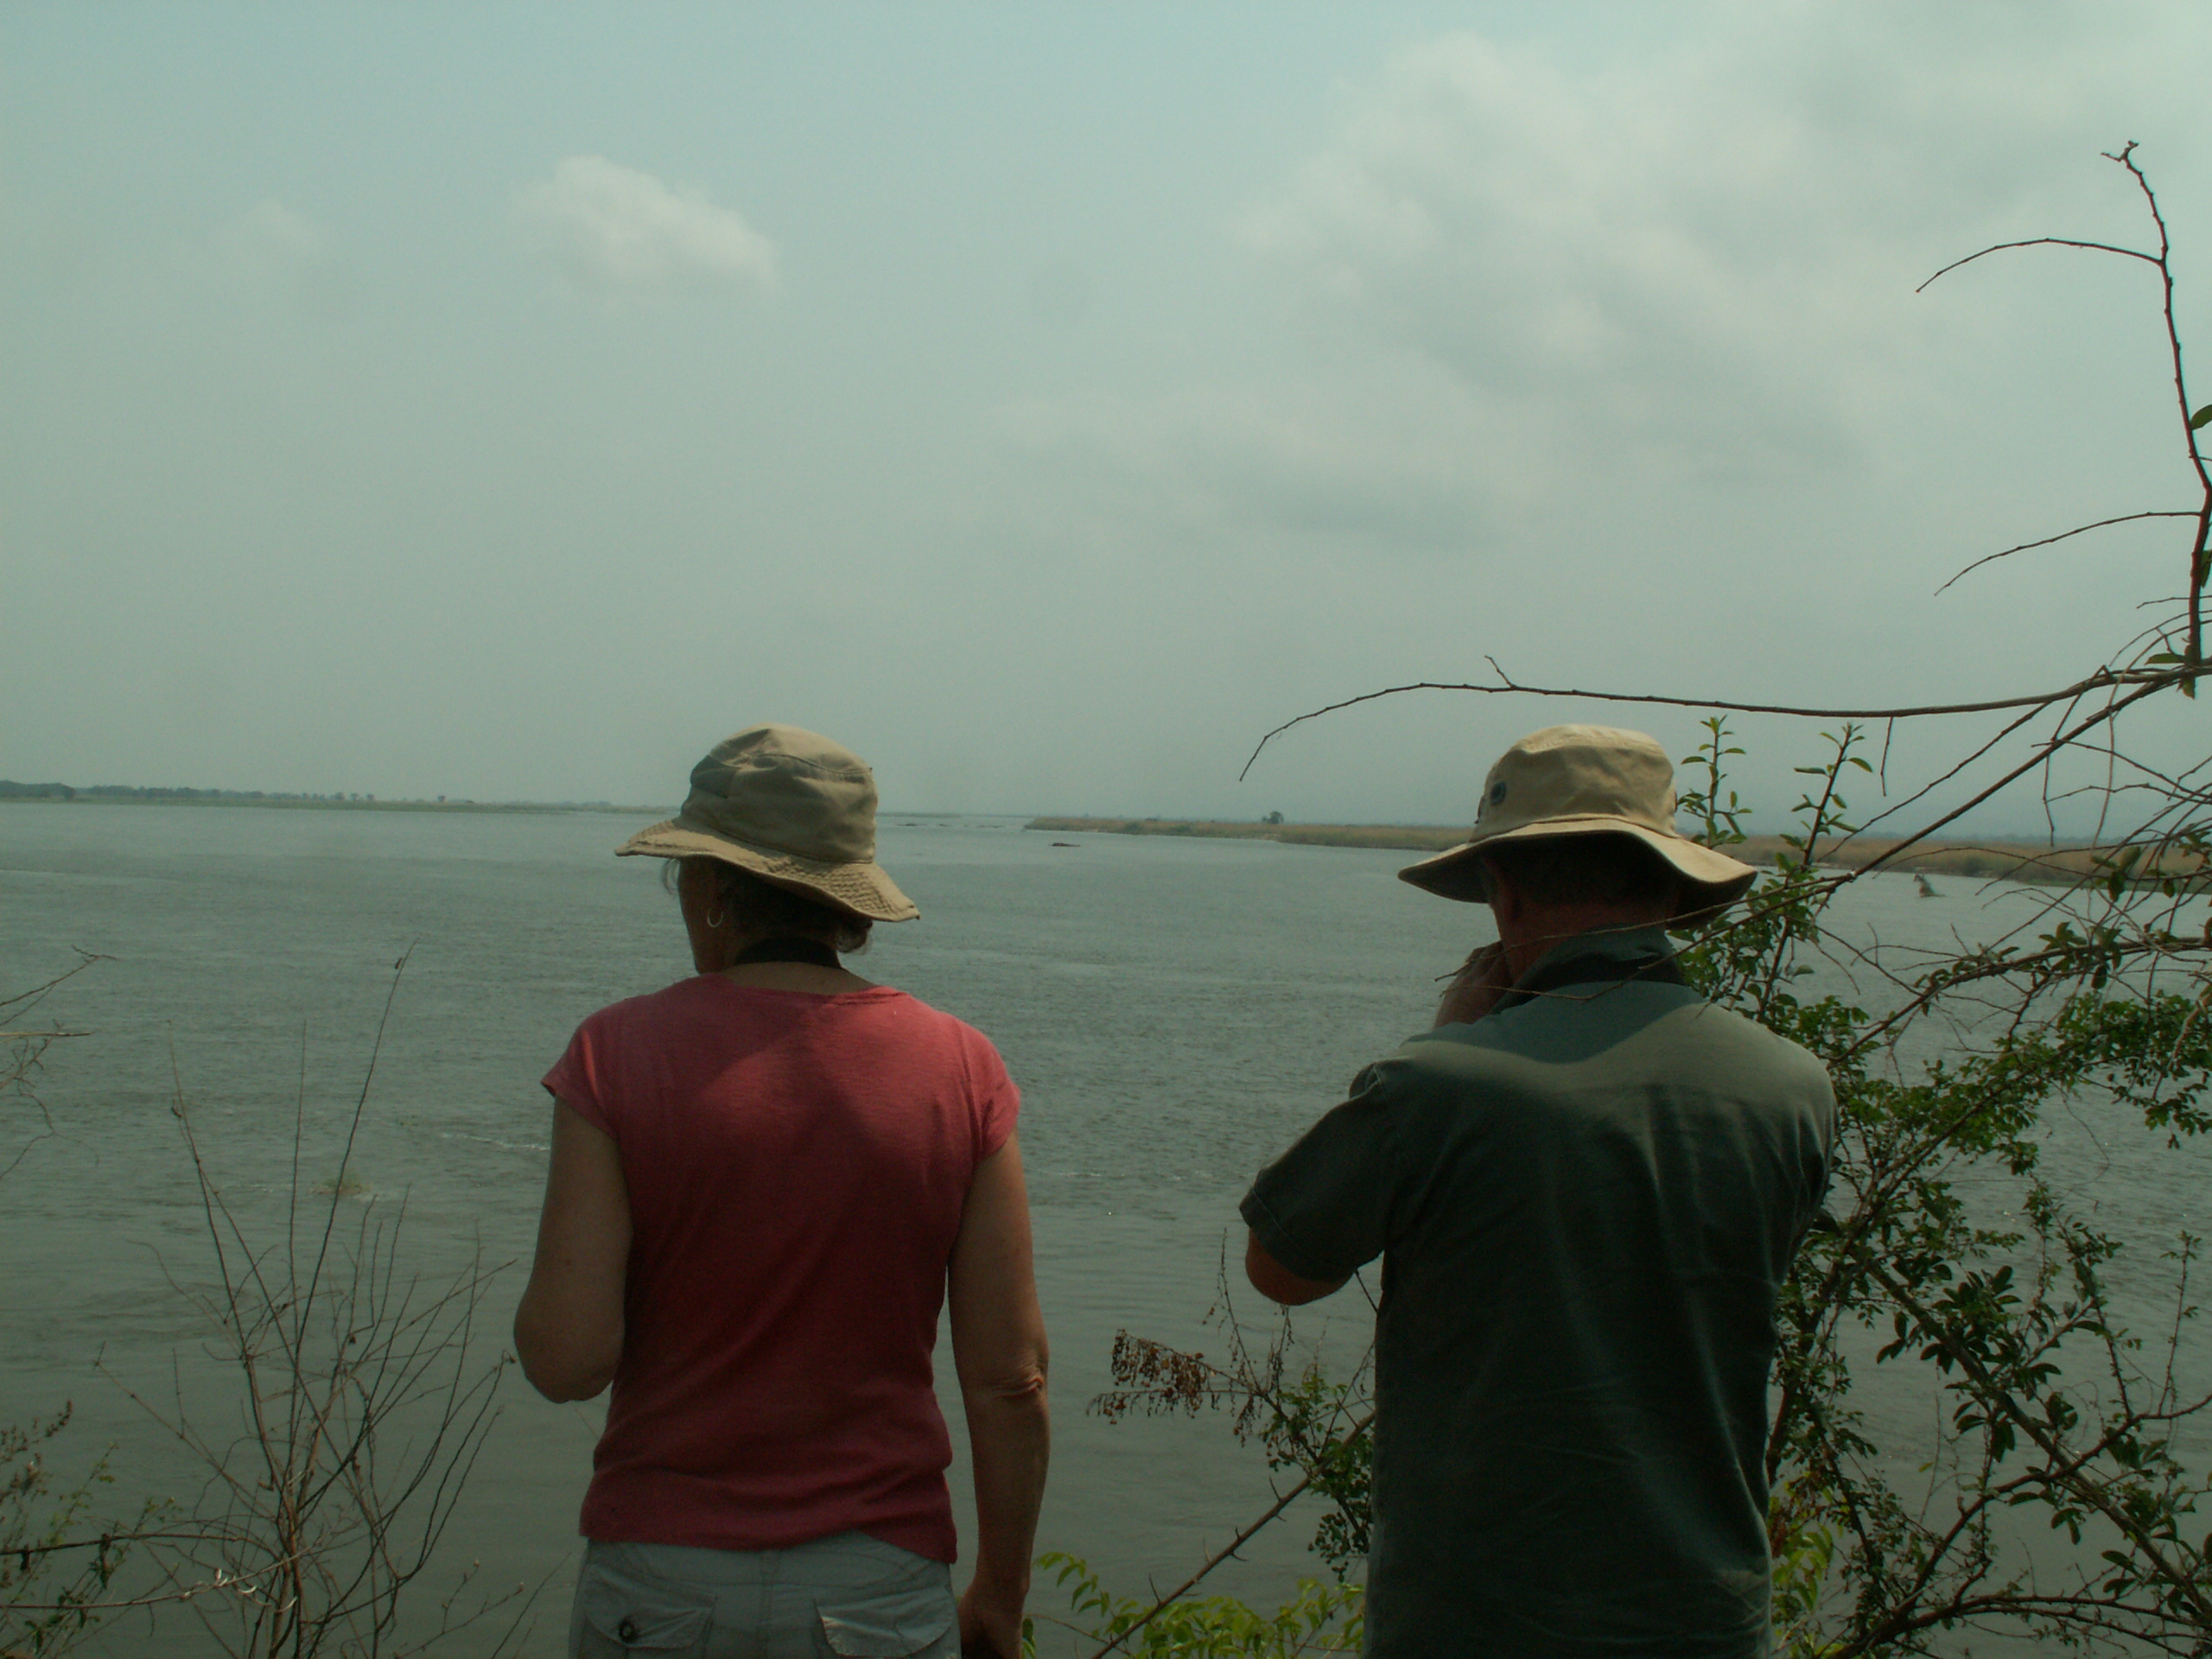 The Zambesi is a huge river as JBW and AJS discover